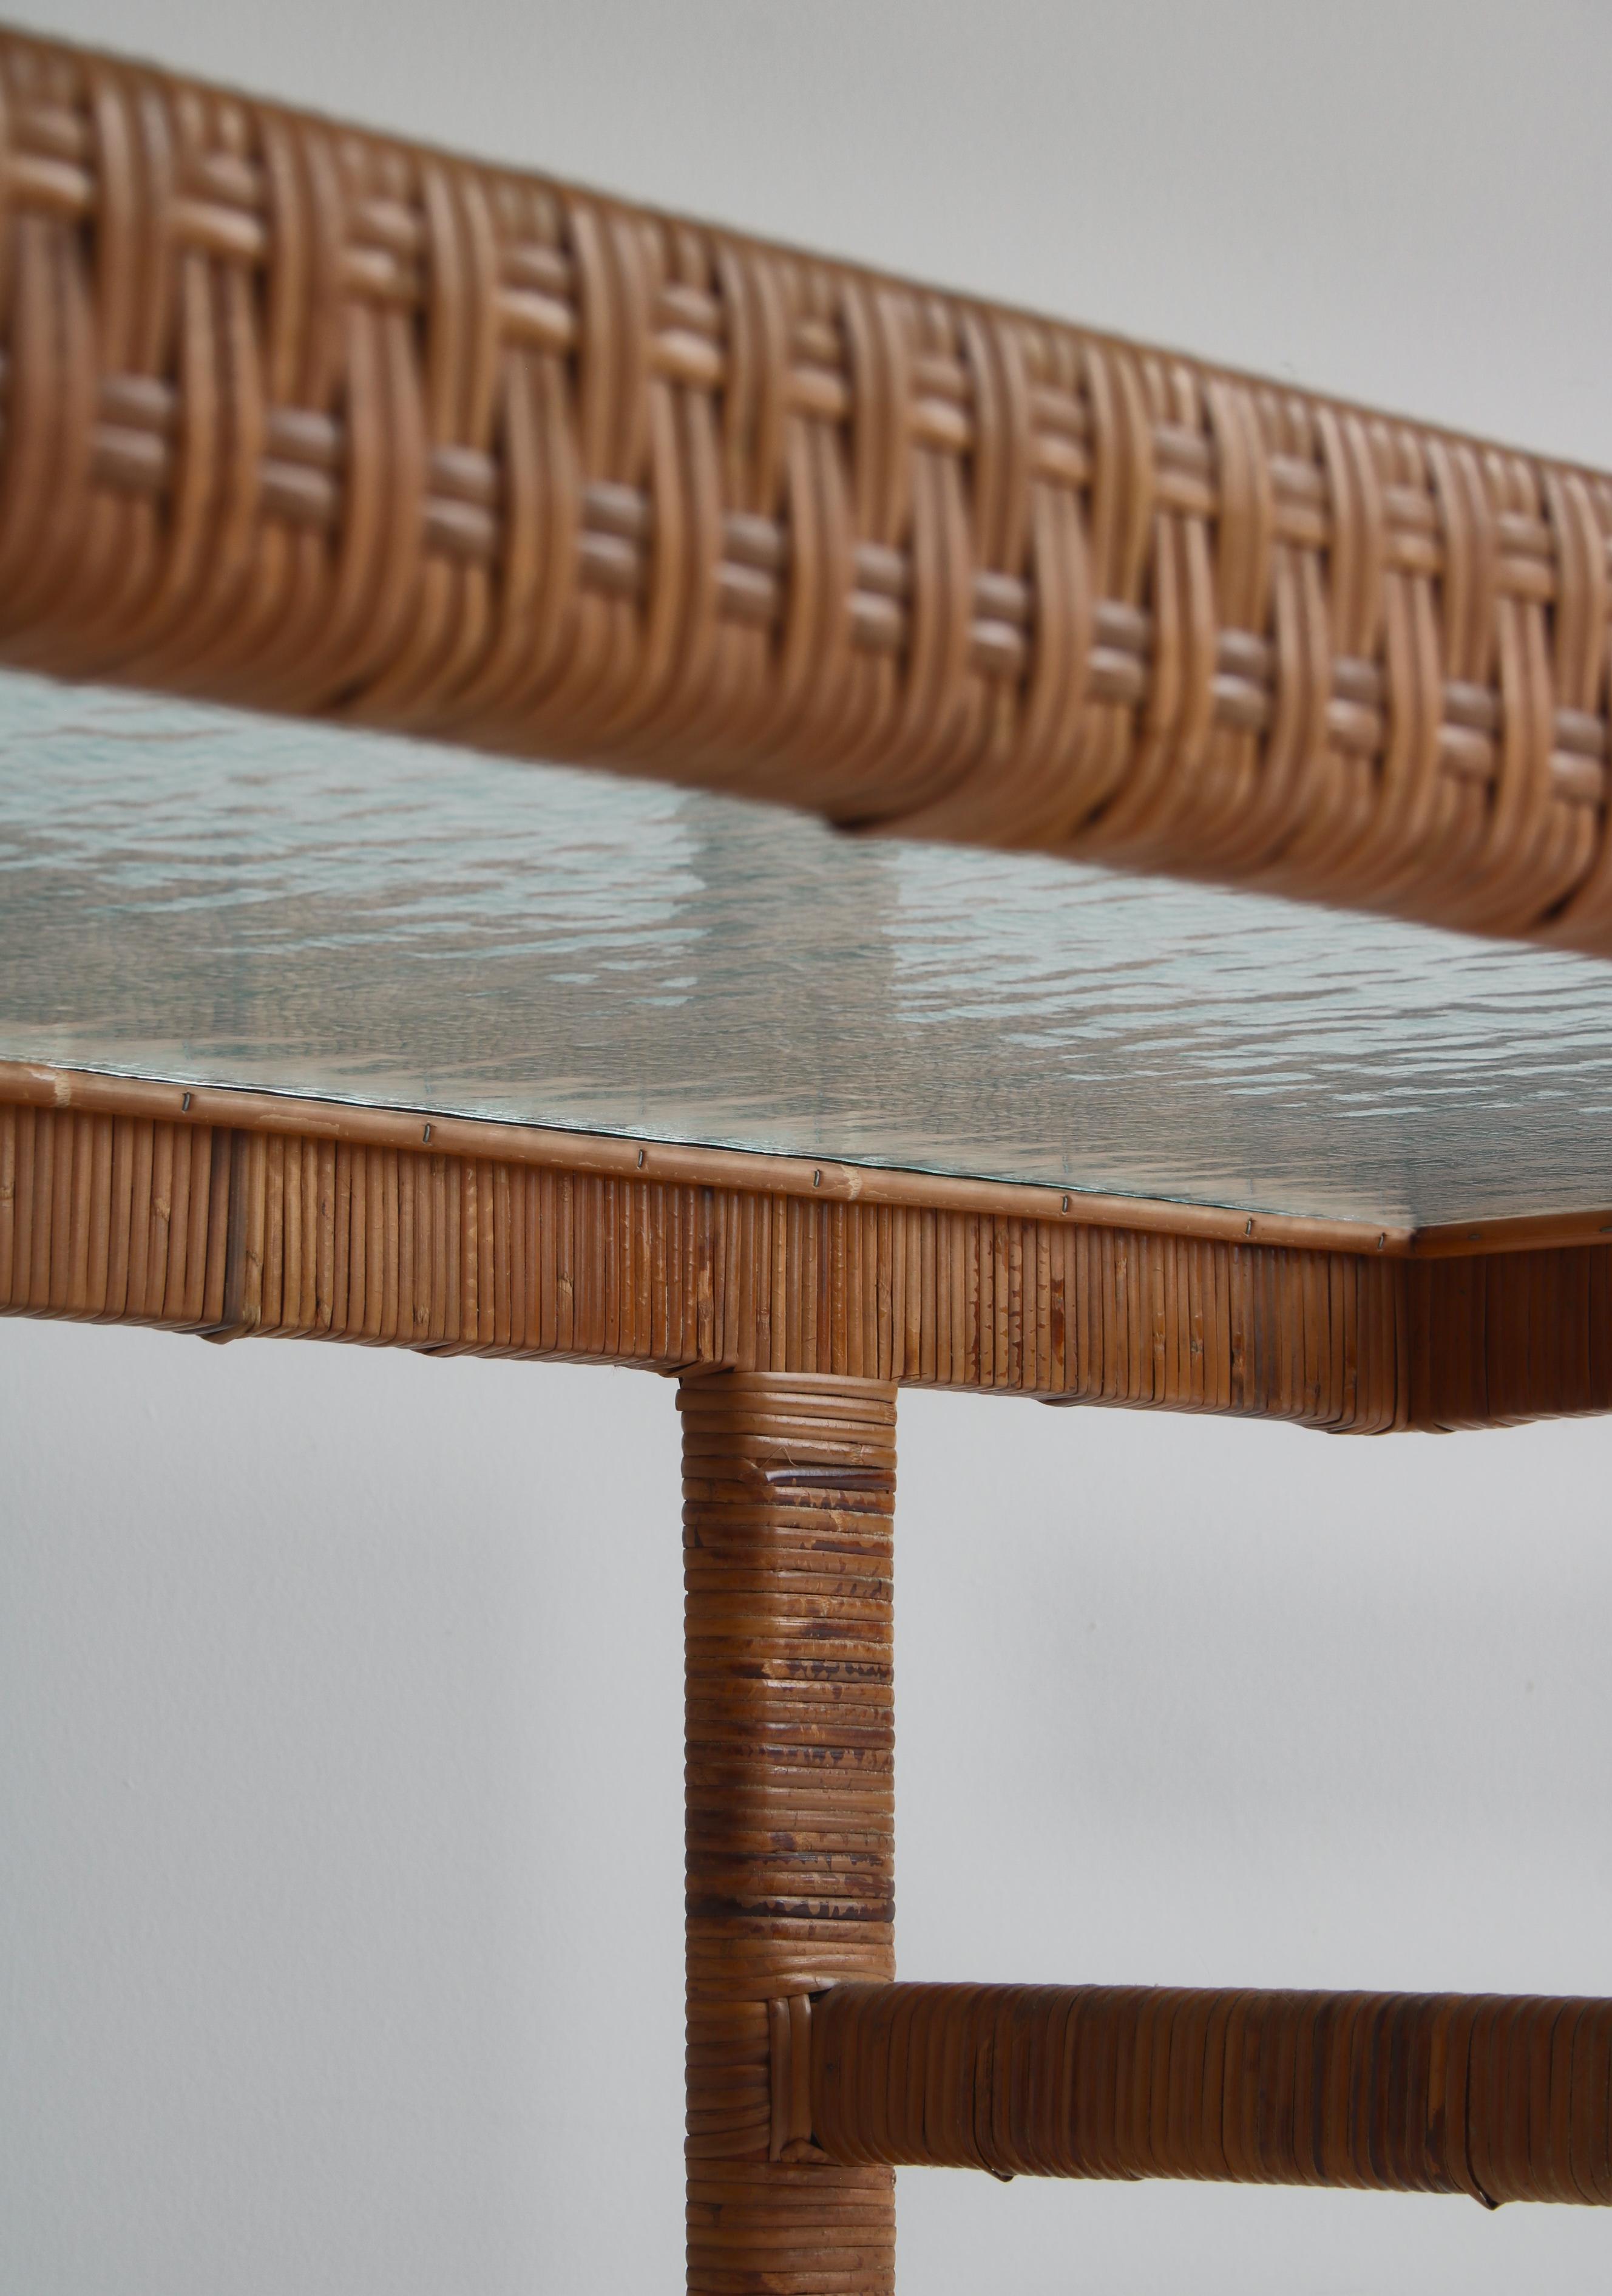 Danish Modern Coffee Table by R. Wengler in Rattan Cane and Matt Glass, 1940s For Sale 5